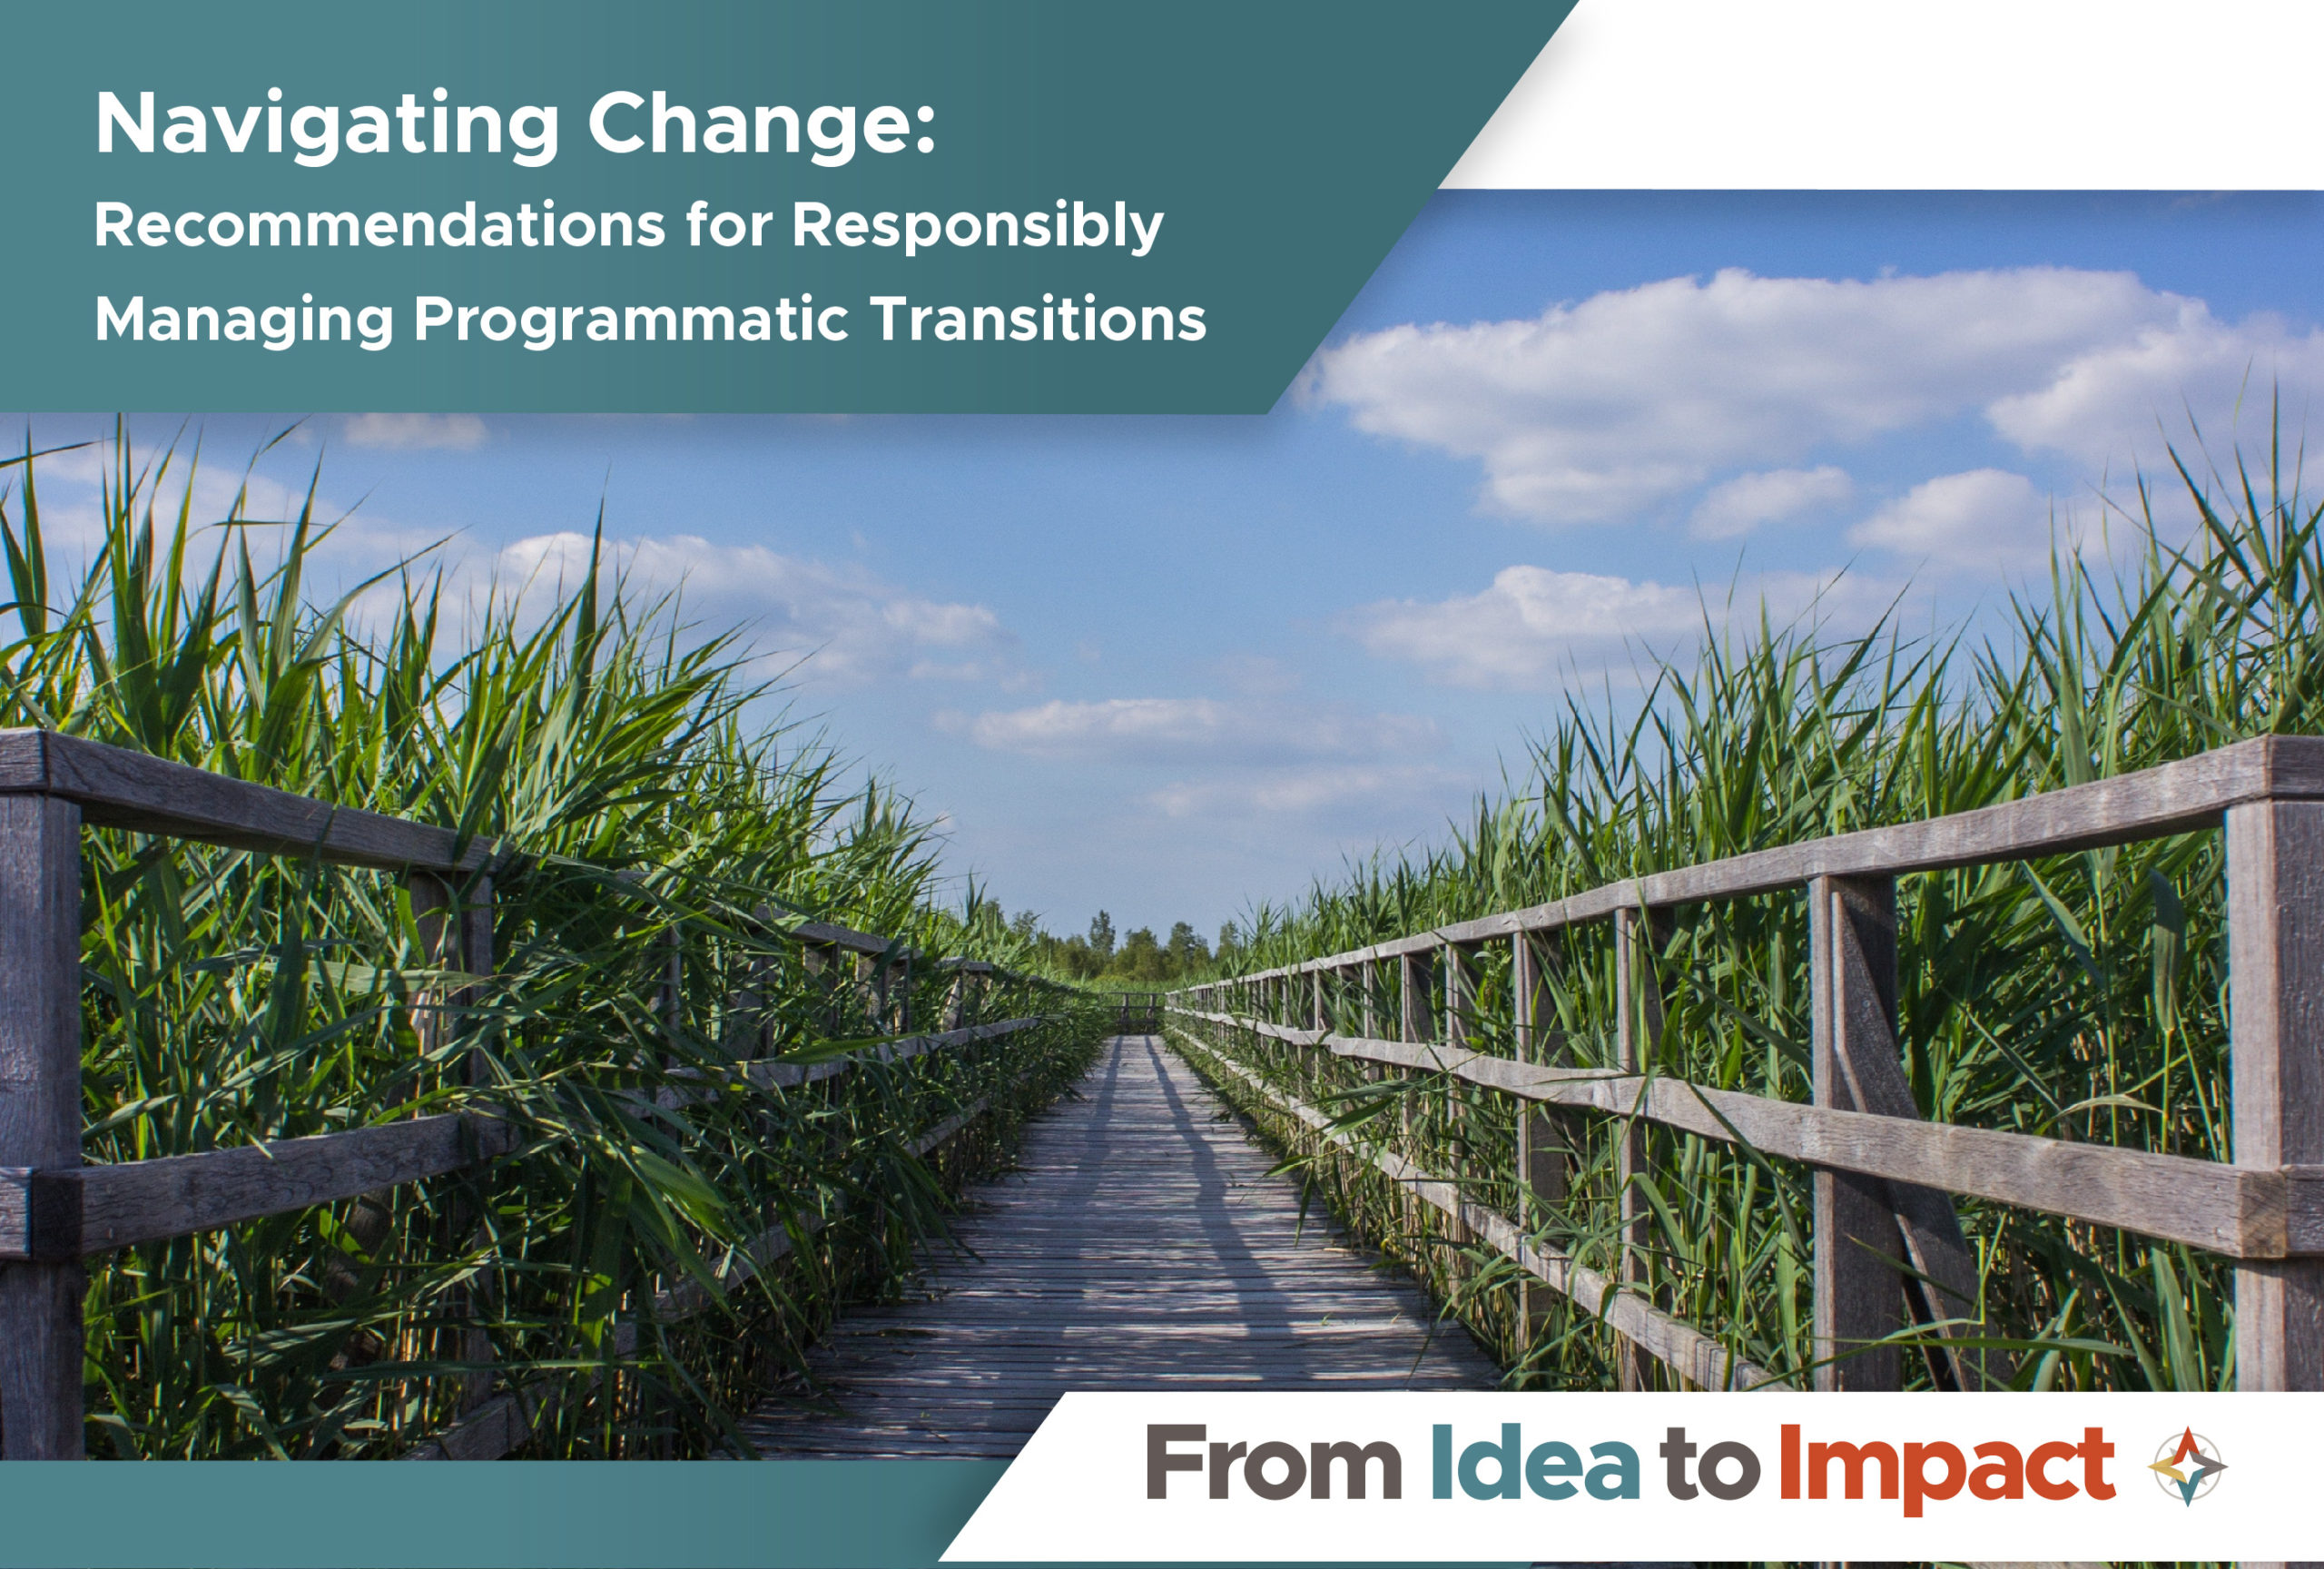 Navigating Change: Recommendations for Responsibly Managing Programmatic Transitions